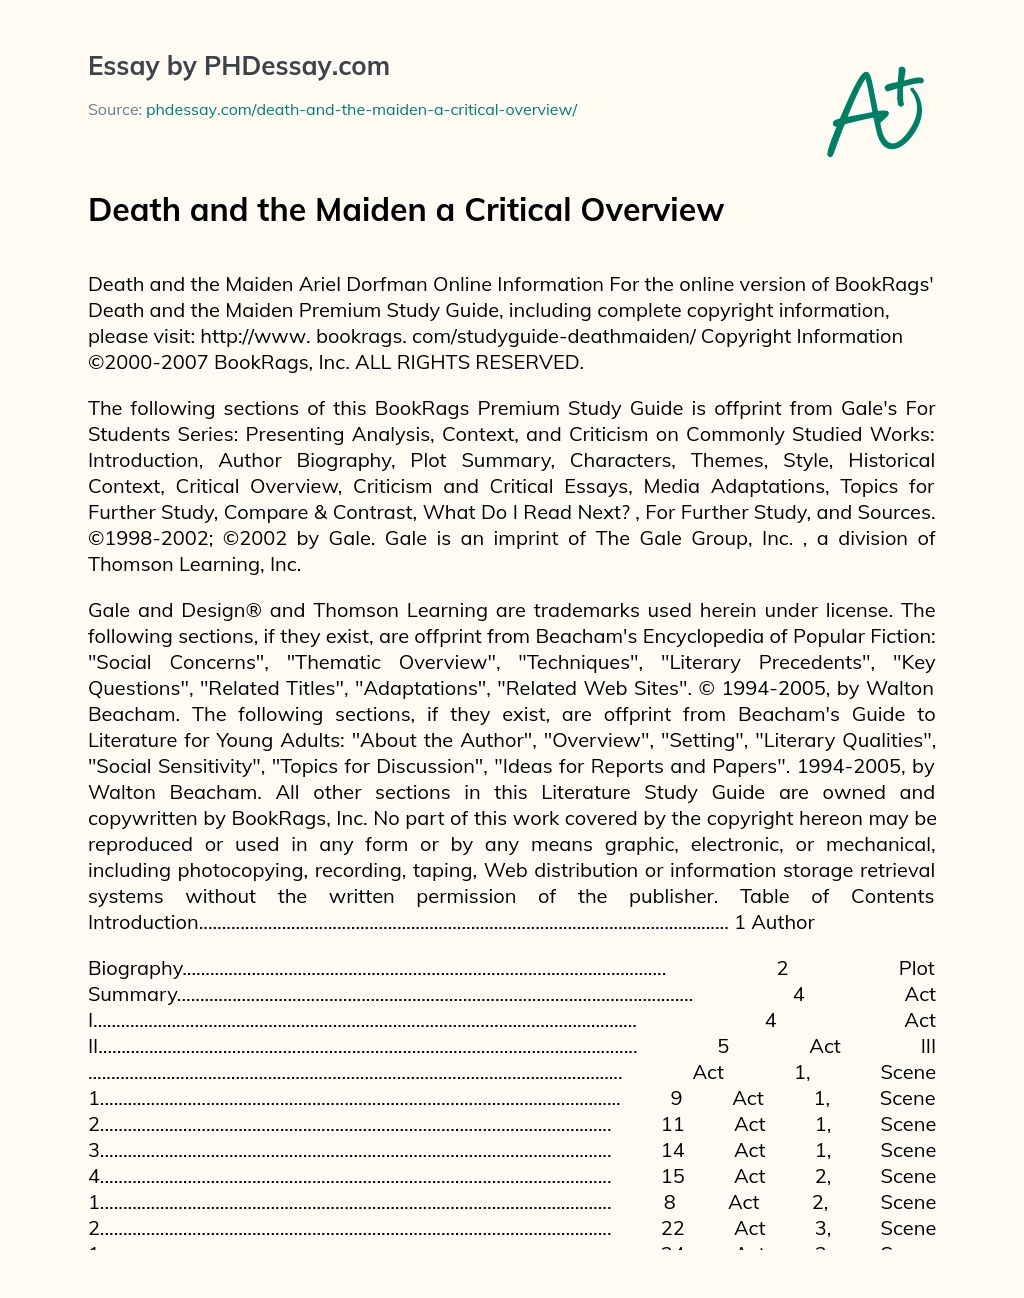 Death and the Maiden: A Critical Overview essay